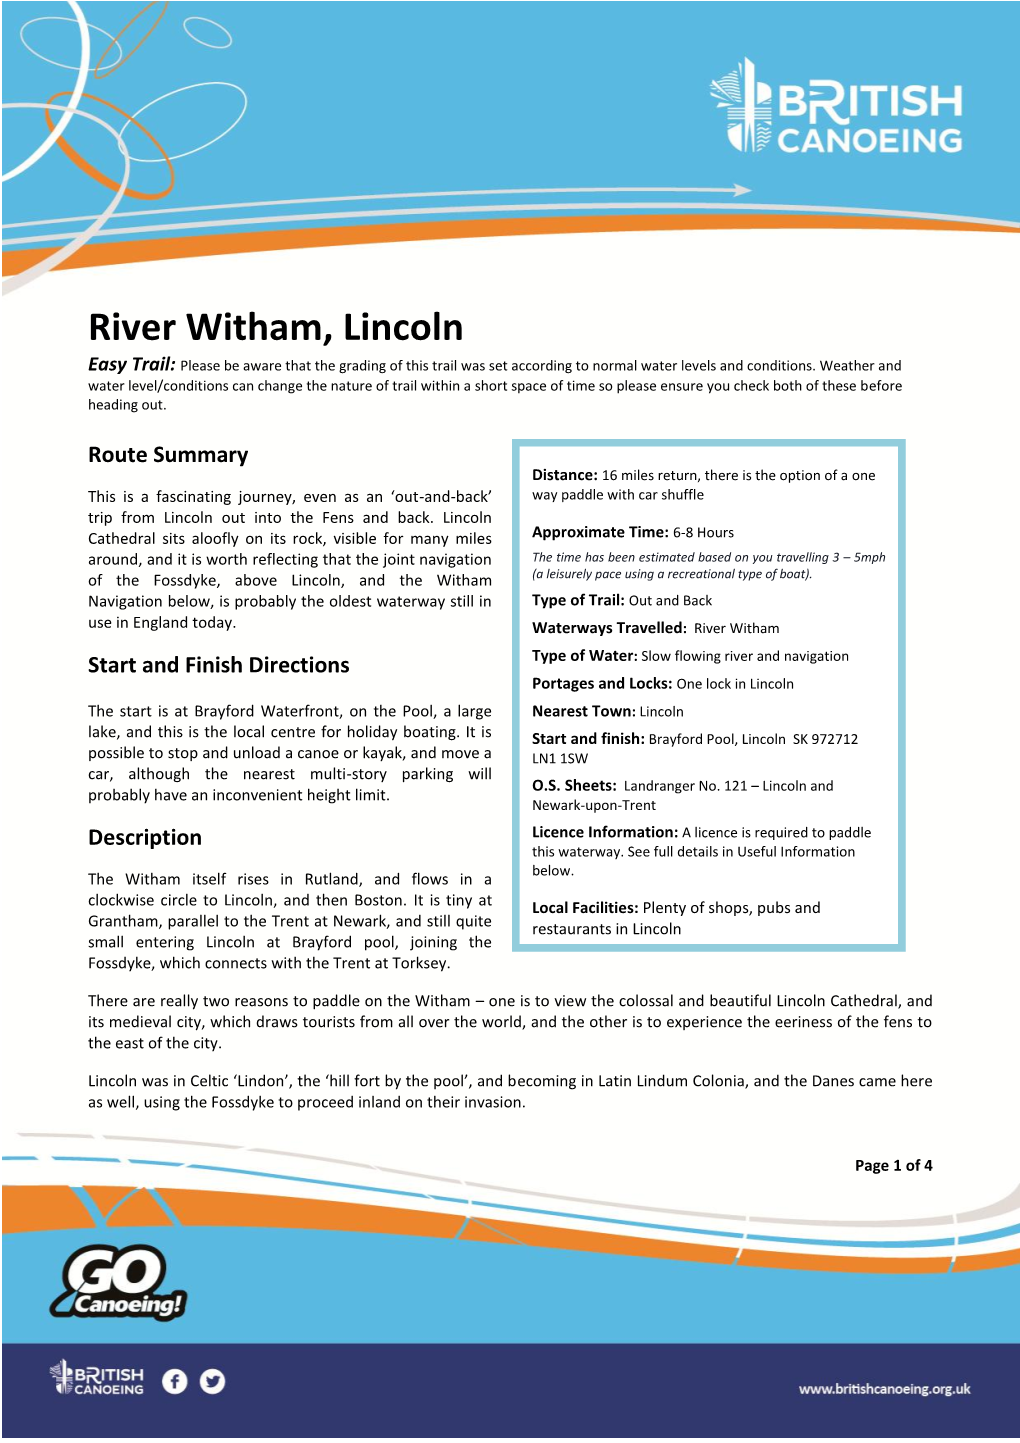 River Witham, Lincoln Easy Trail: Please Be Aware That the Grading of This Trail Was Set According to Normal Water Levels and Conditions